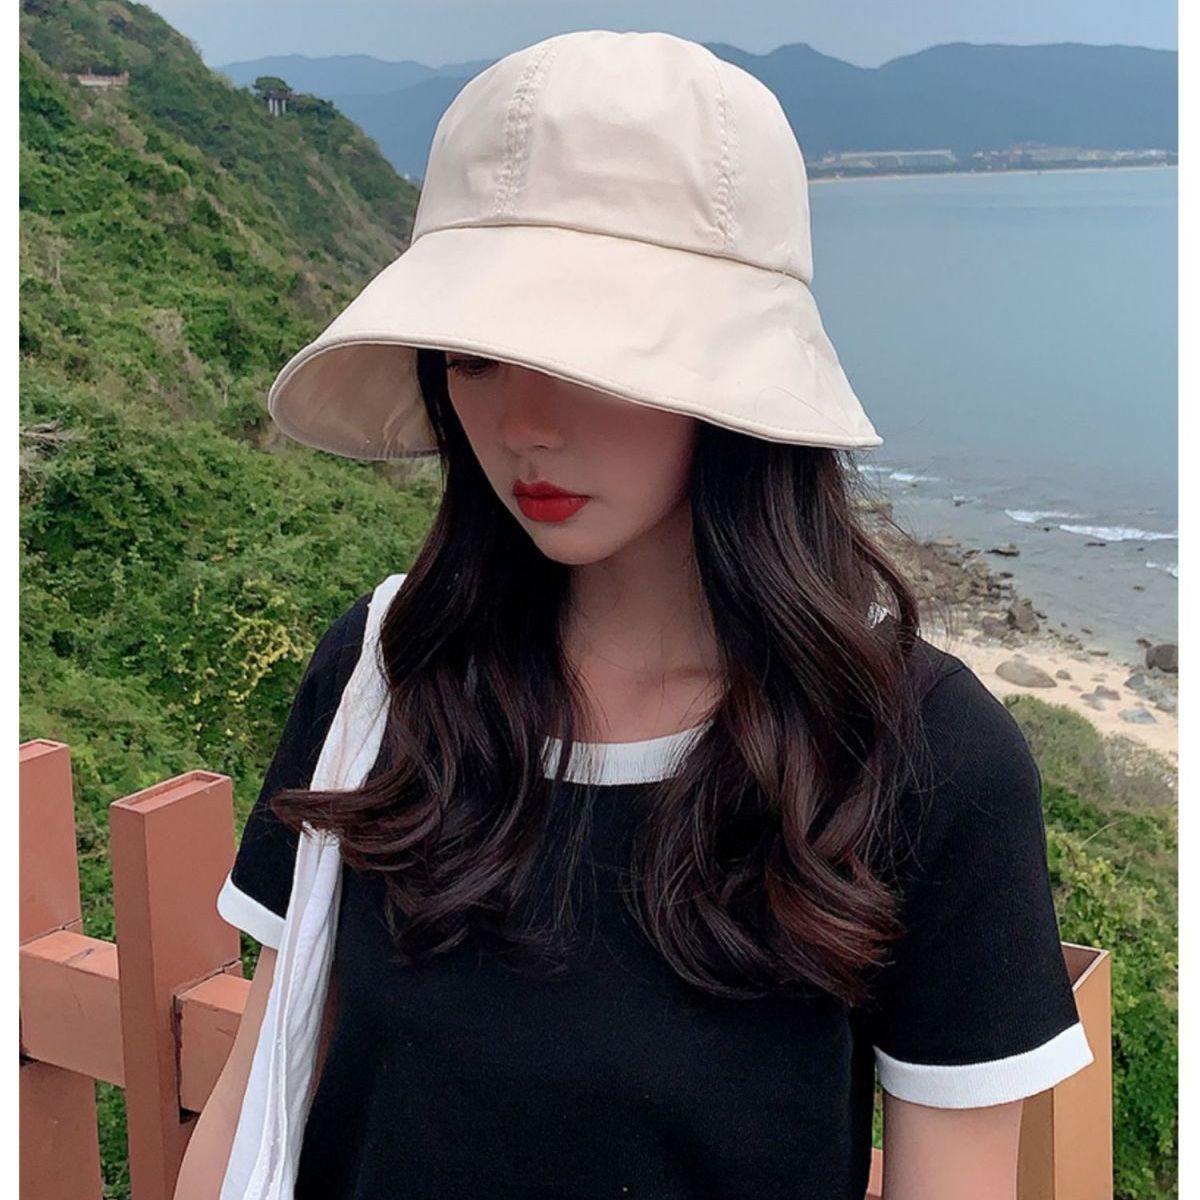 Fisherman hat female summer can tie ponytail sun hat Korean version of the all-match sunscreen face cap thin section cotton sun hat